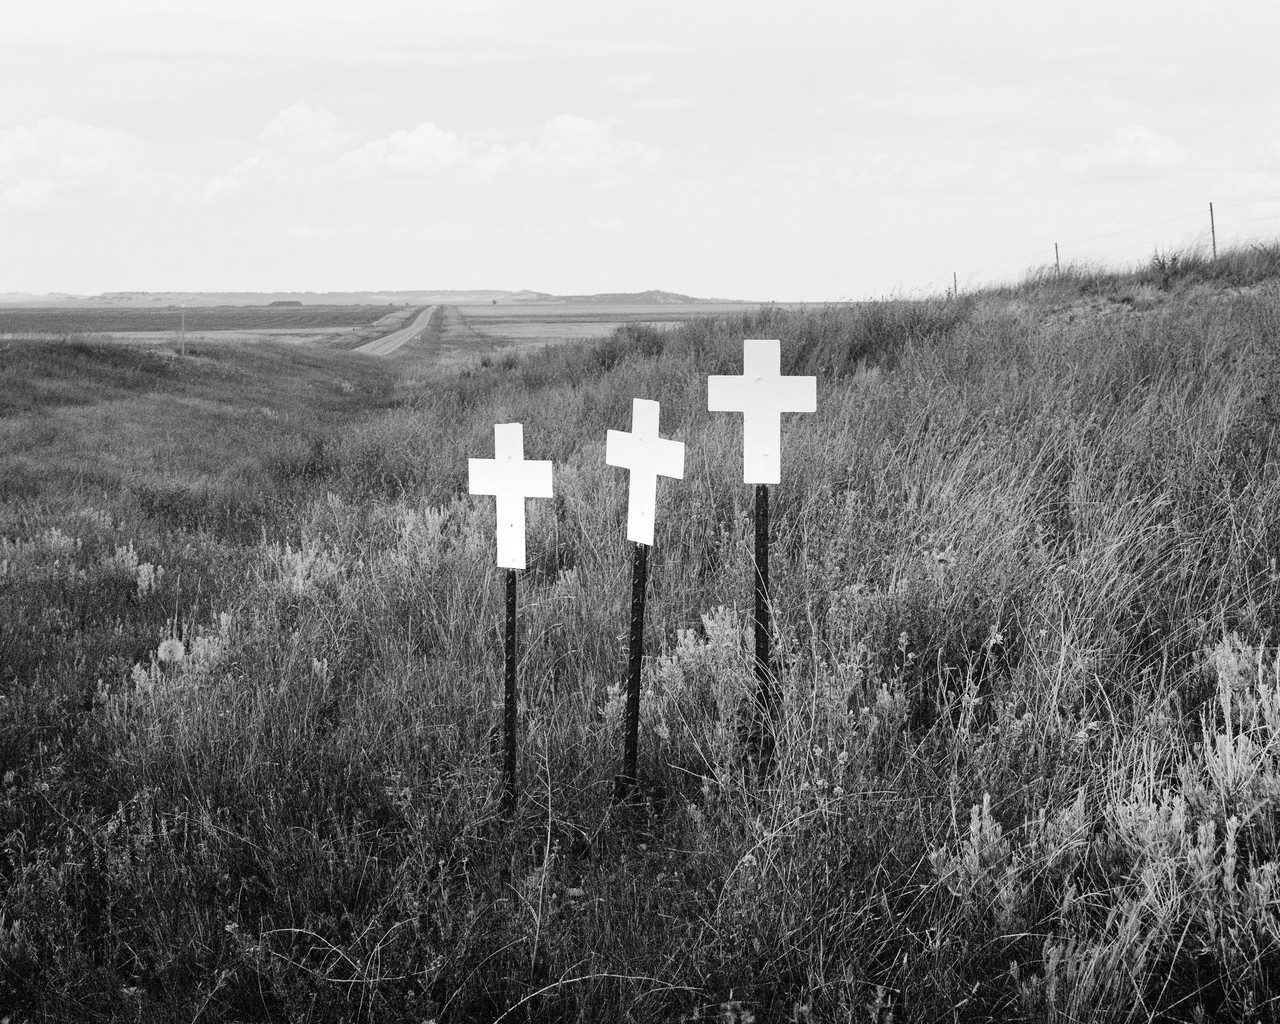 Black and white photograph depicting a rural road and three white crosses planted in the grass as markers of deadly road accidents.